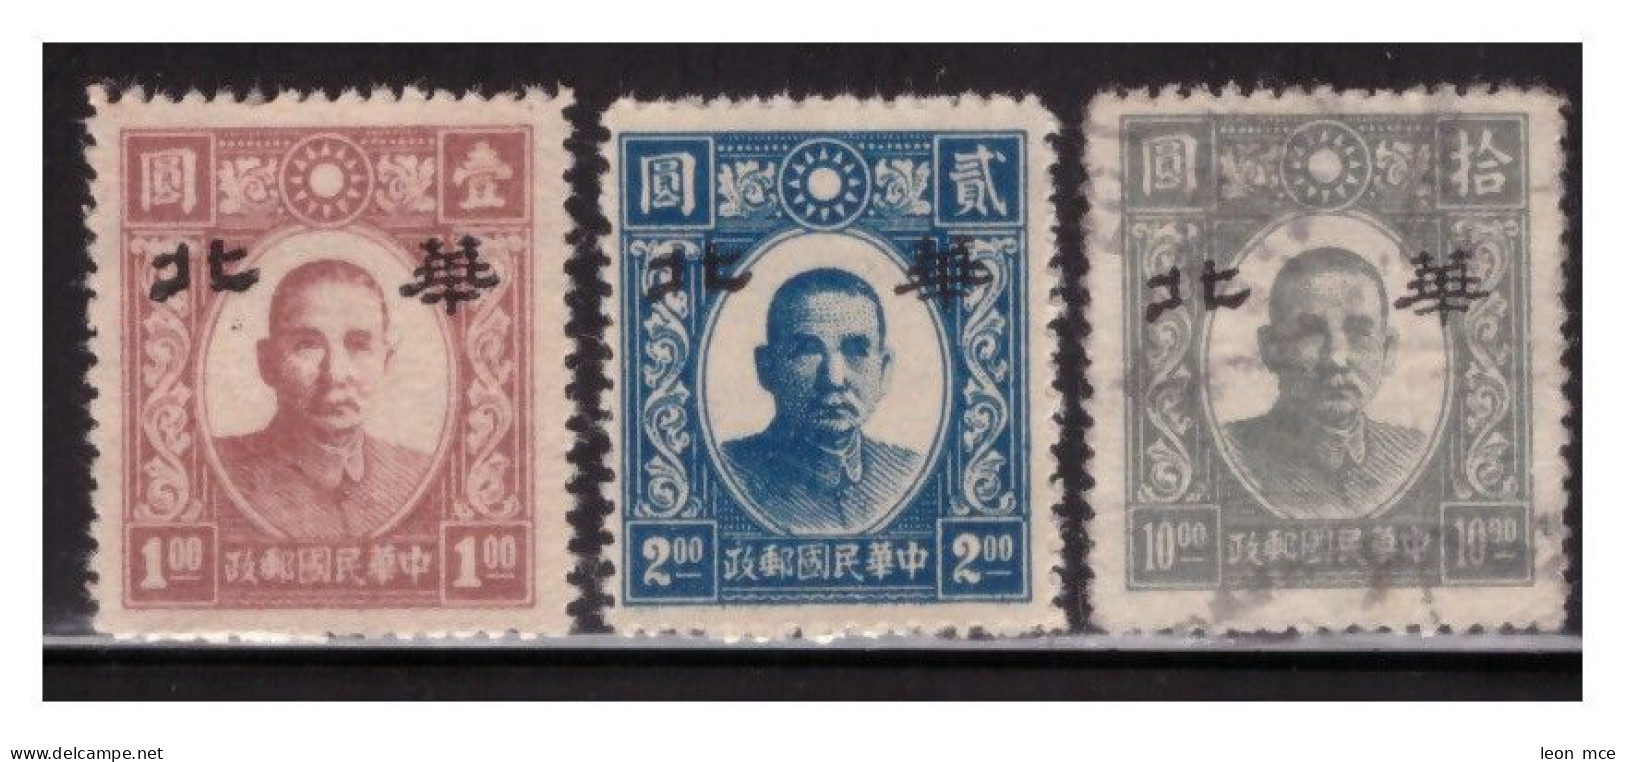 1945 CHINA NORTH "HWA PEI" Dr. SUN YAT-SEN, WITHOUT Overprint Are Proofs STAMPS (3) - 1941-45 Nordchina